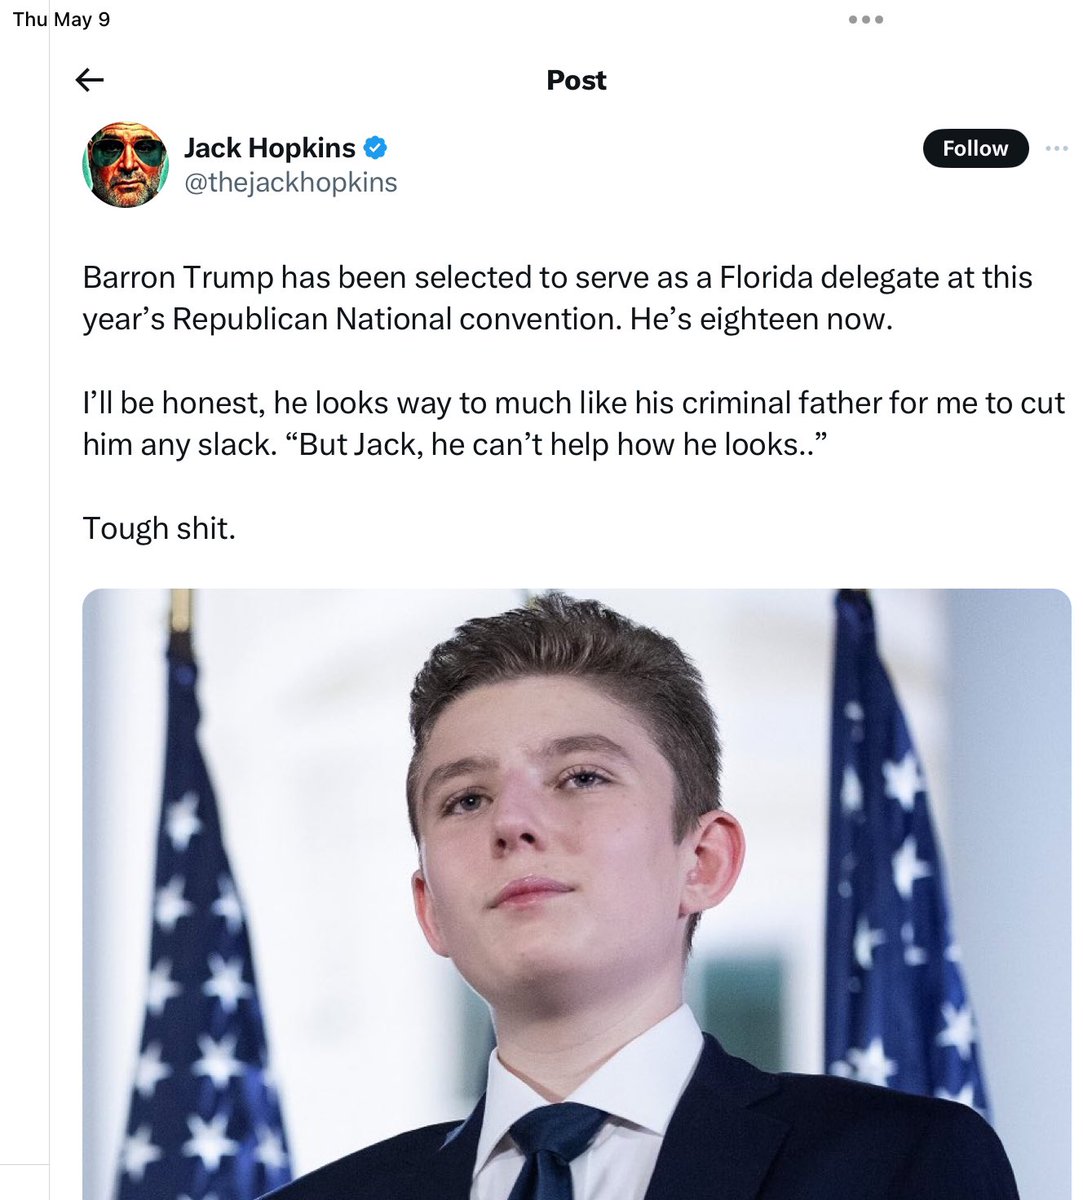 Look at this sick freak - @thejackhopkins - declaring open season on 18-yo Barron Trump, and all the leftist-progressive sycophants lining up to vilify the young man all for the fact that he was born a Trump. Does Jack Hopkins think this makes him a “big” man? What a soft,